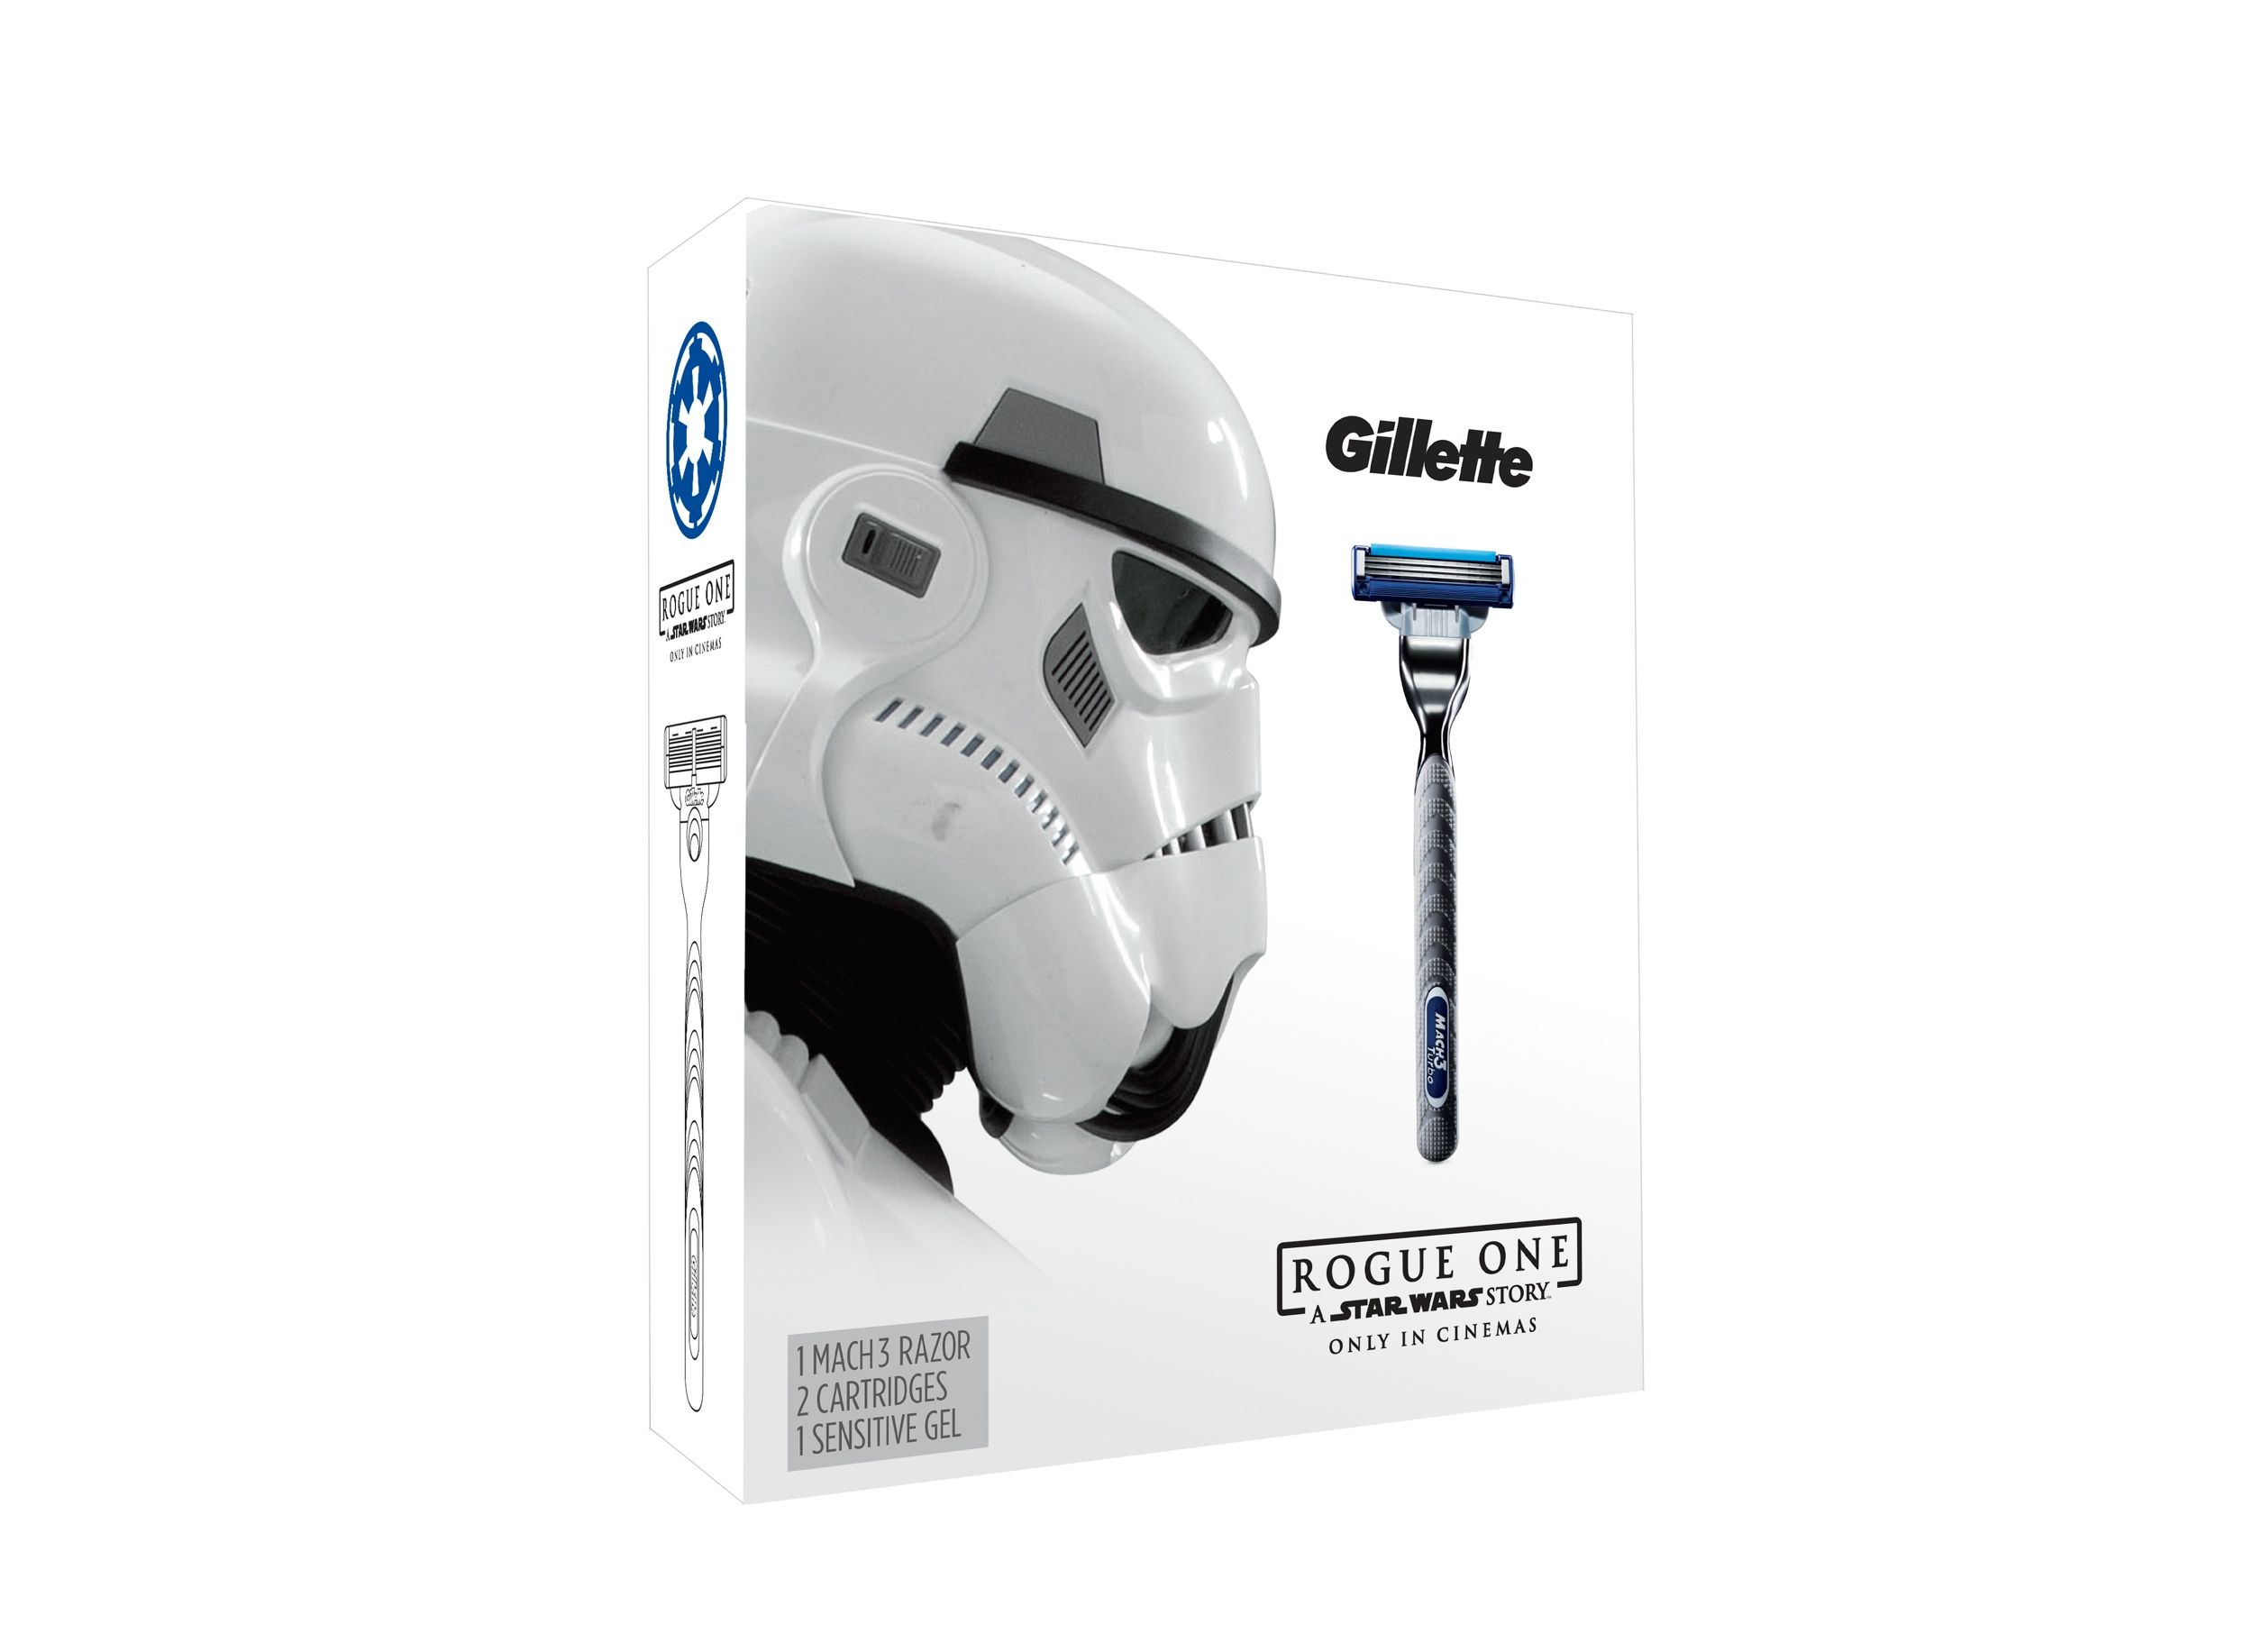 Rogue One and Gillette Special Edition MACH3 Gift Pack (Stormtrooper)